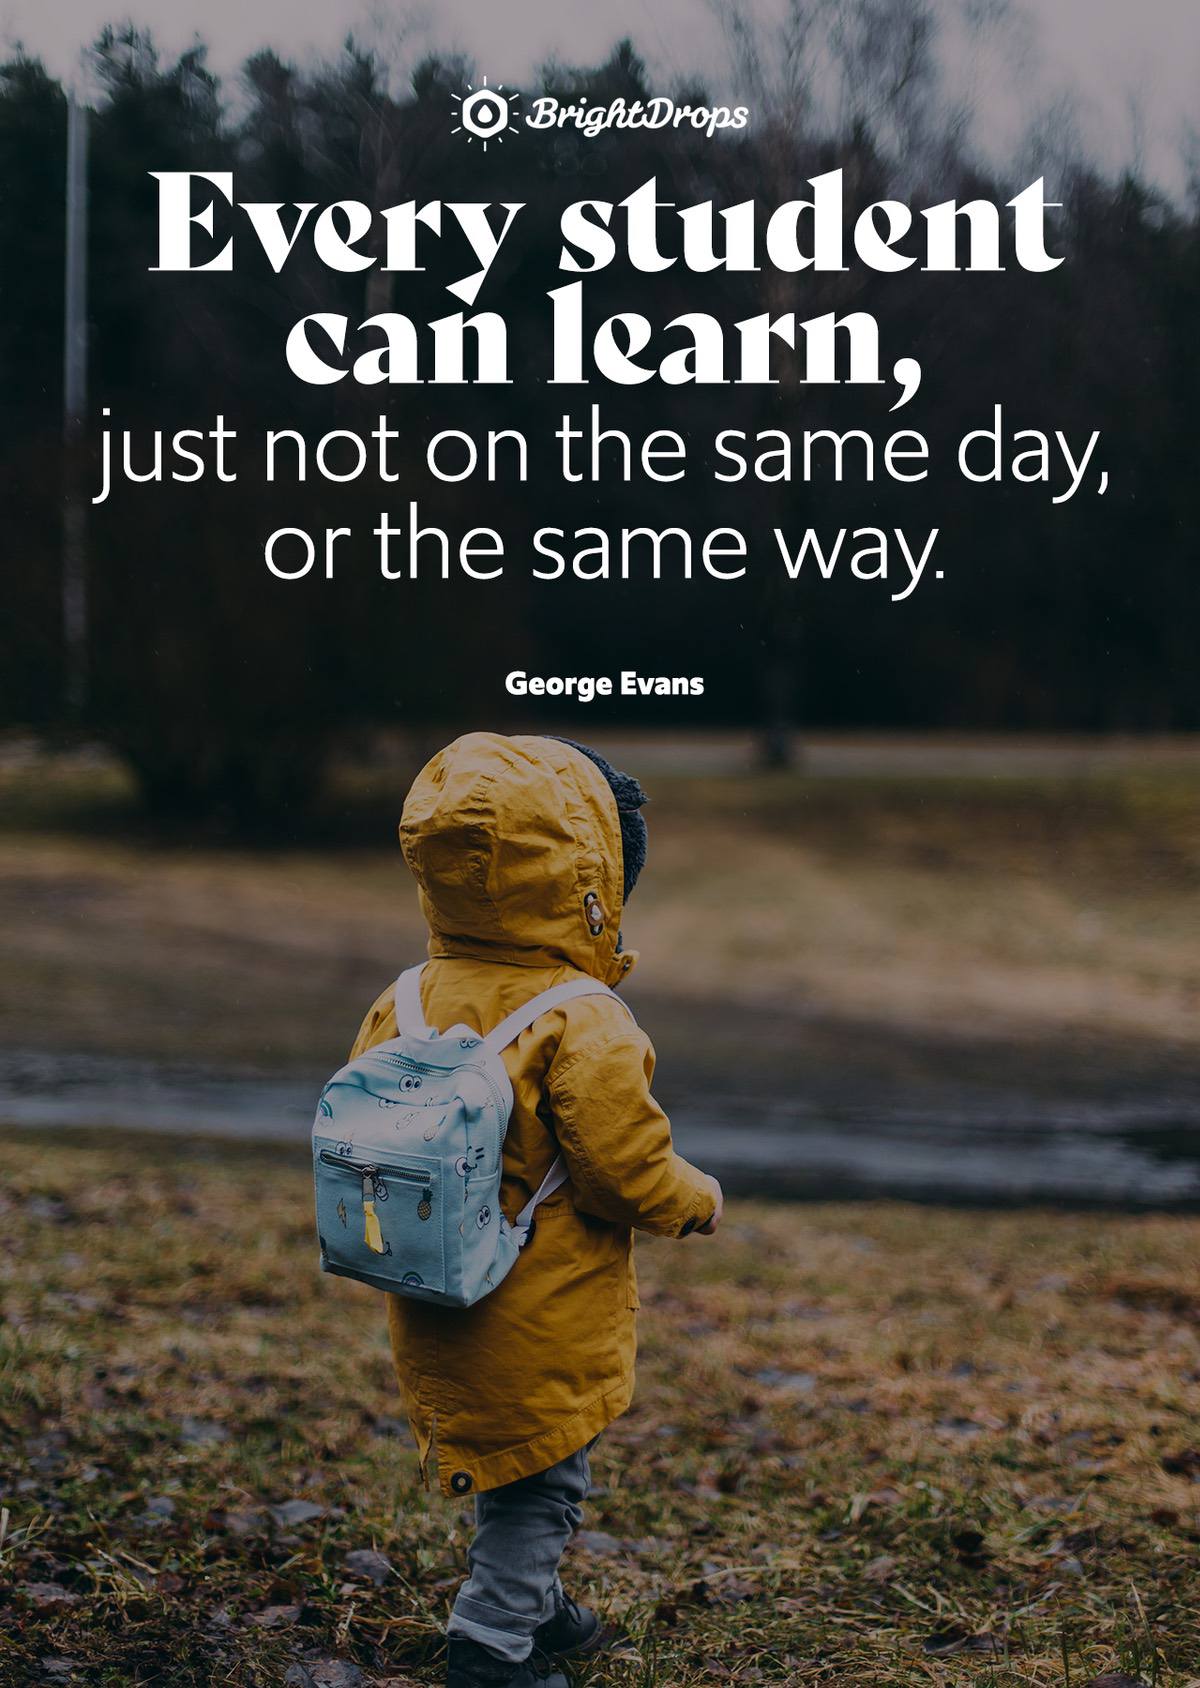 61 Most Uplifting and Inspirational Quotes for Teachers (2023)